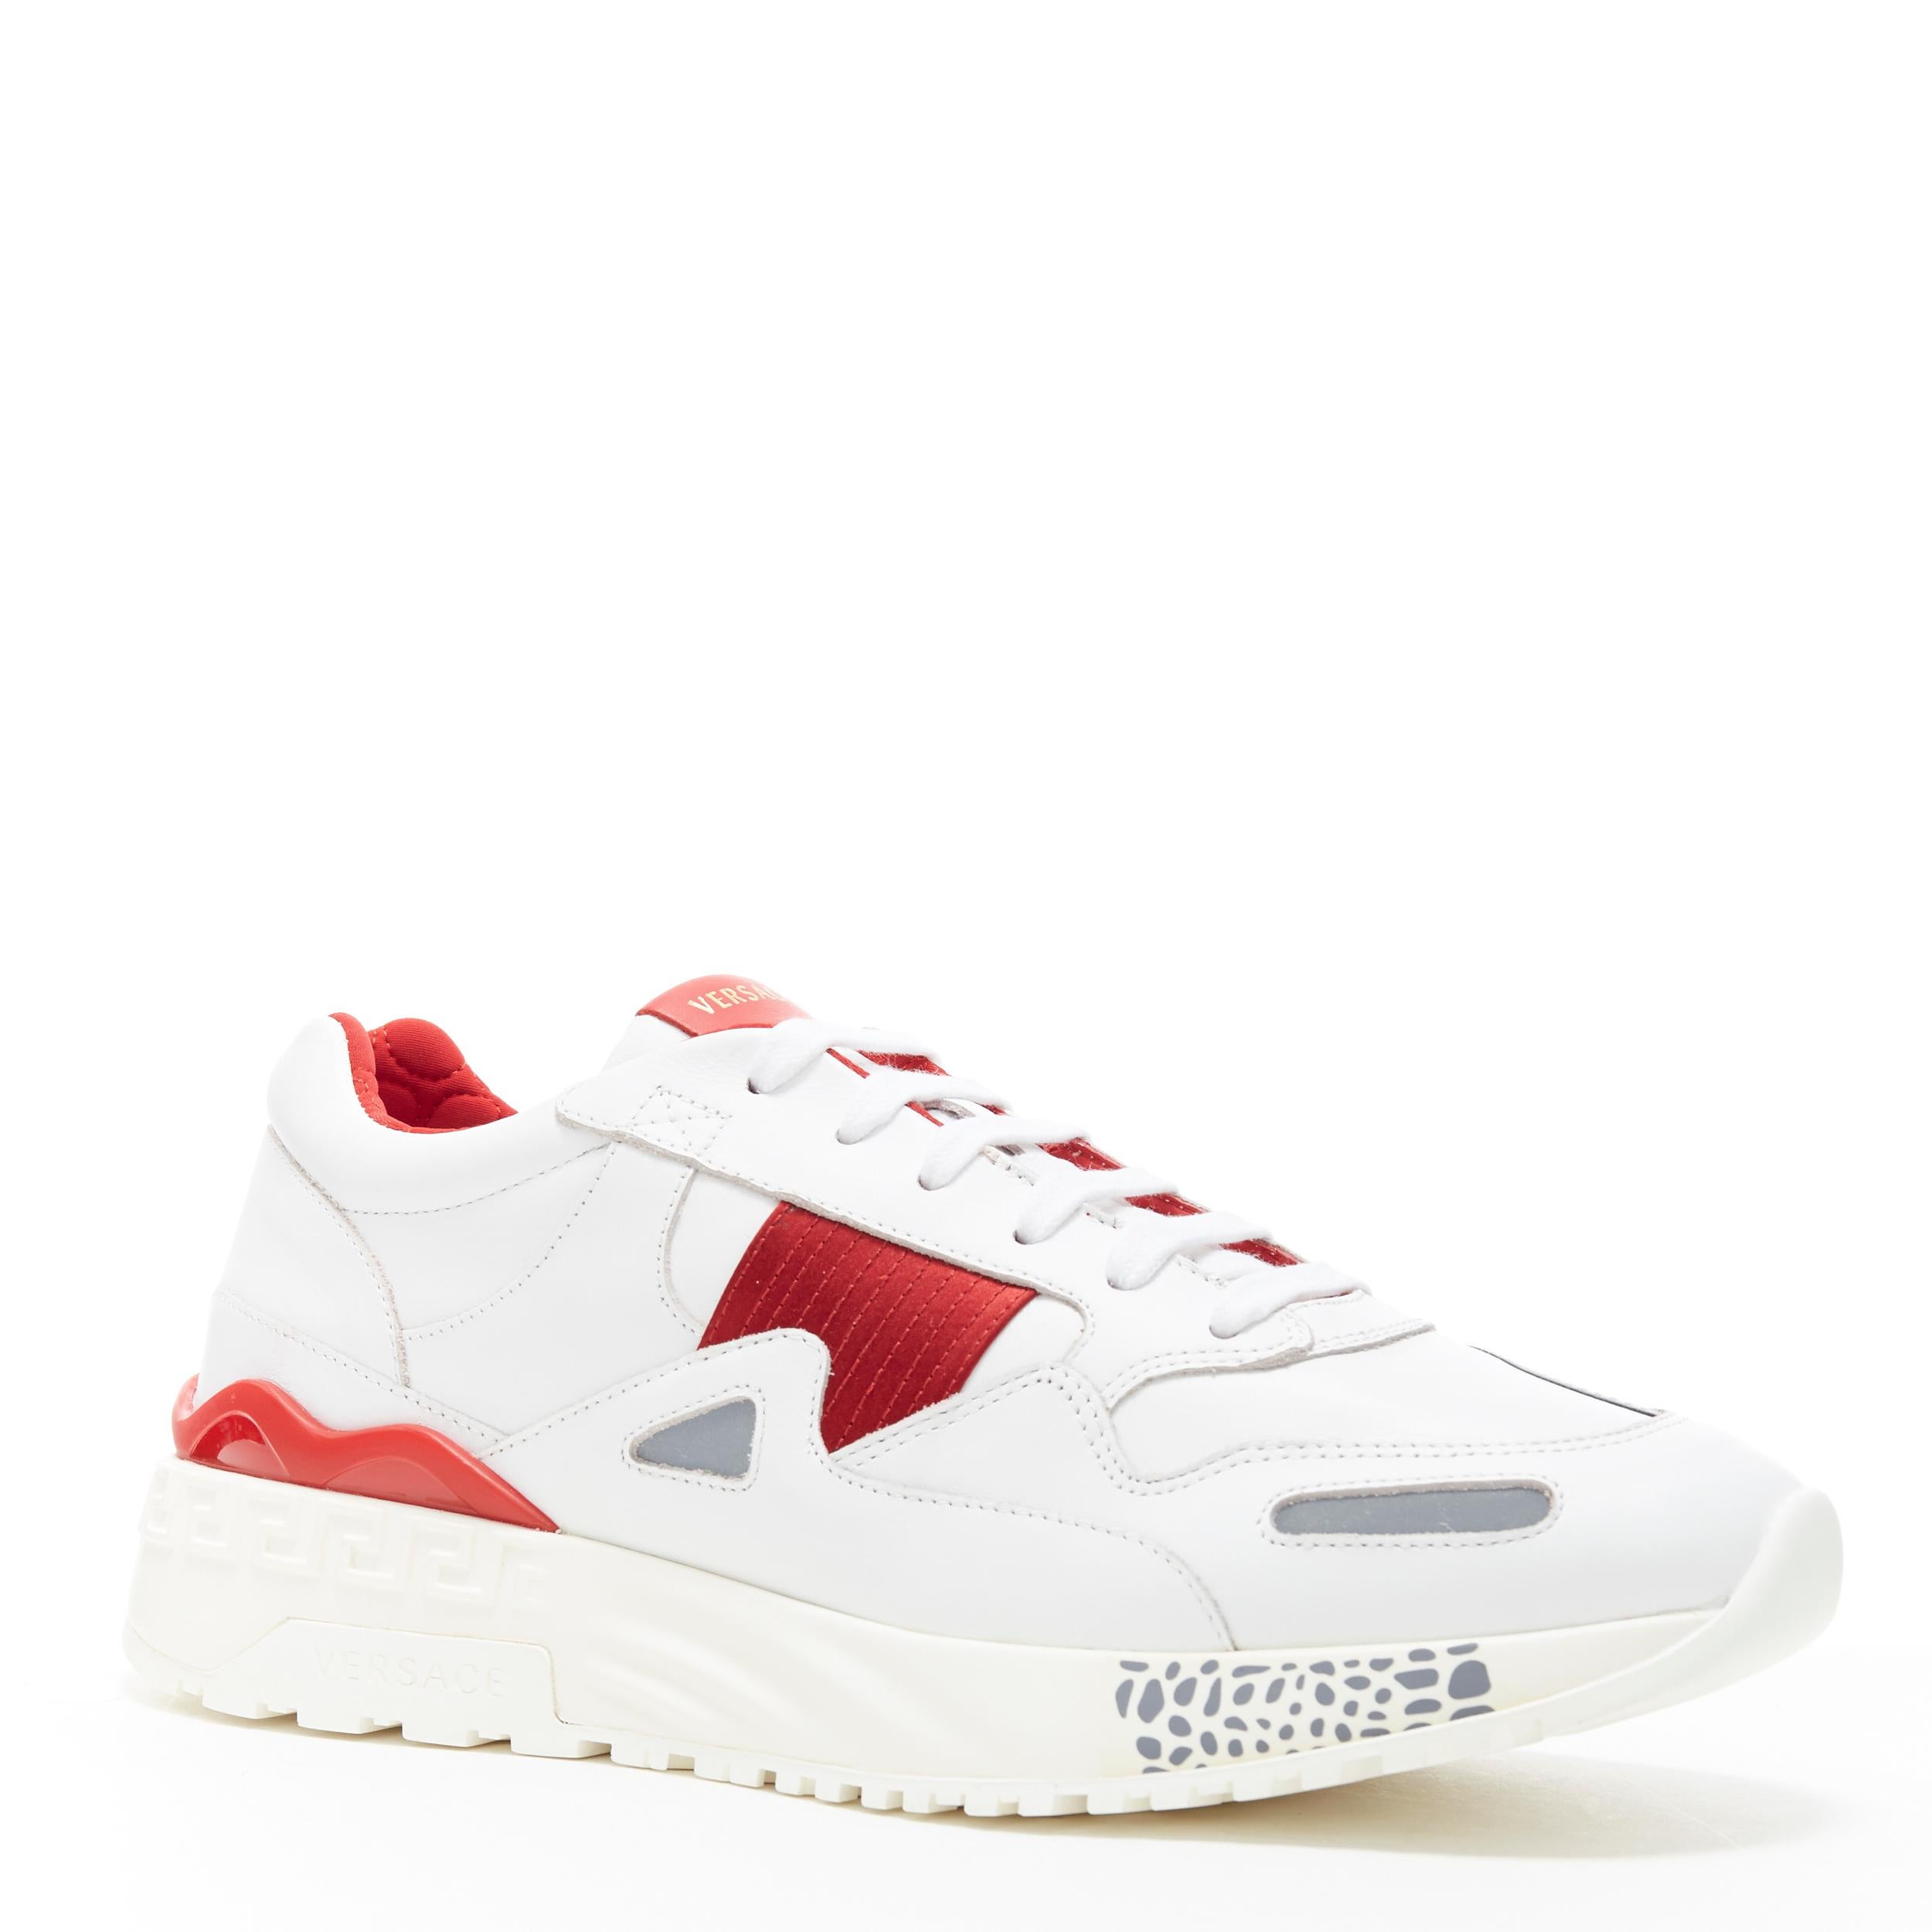 new VERSACE Achilles white lamb leather red satin chunky sole dad sneakers EU40
Brand: Versace
Designer: Donatella Versace
Model Name / Style: Achilles sneakers
Material: Leather; lamb leather
Color: White; red detail
Pattern: Solid
Closure: Lace